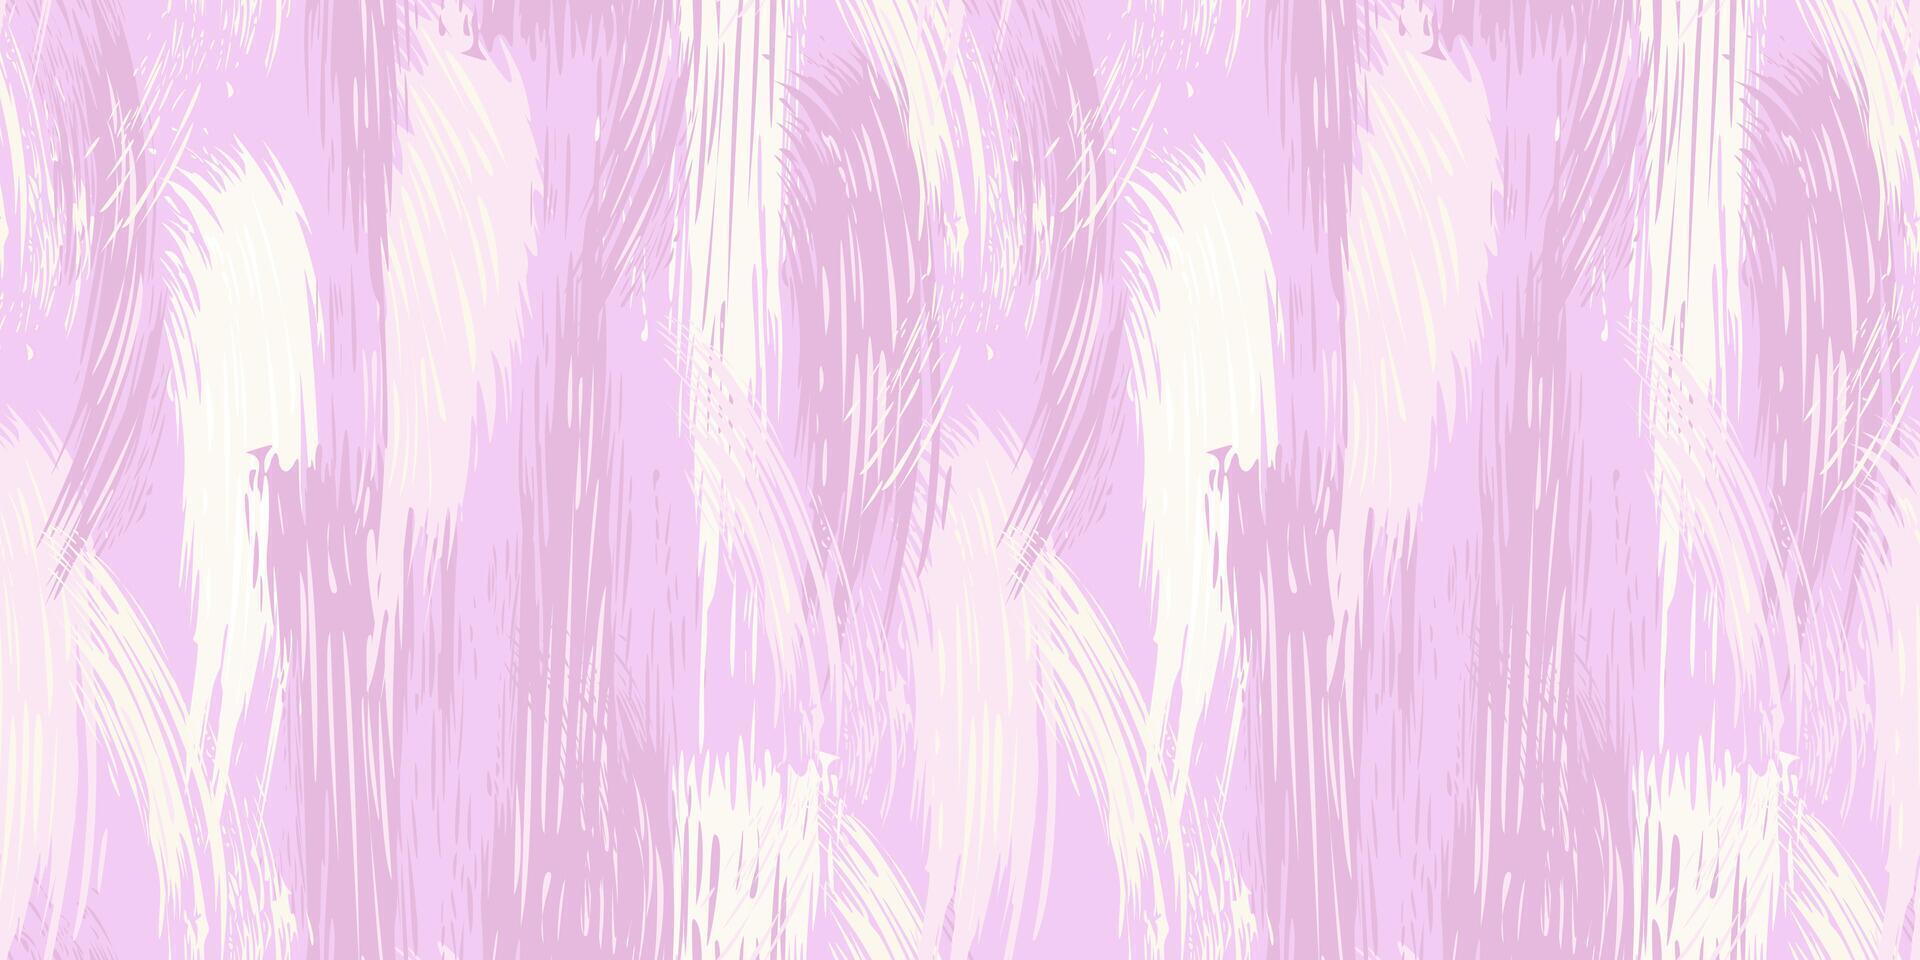 Pastel artistic oil dynamic brush strokes texture seamless pattern. Pink splashes of paint on a light background. Abstract geometric print with stains, drops, spots vertical lines pattern. vector